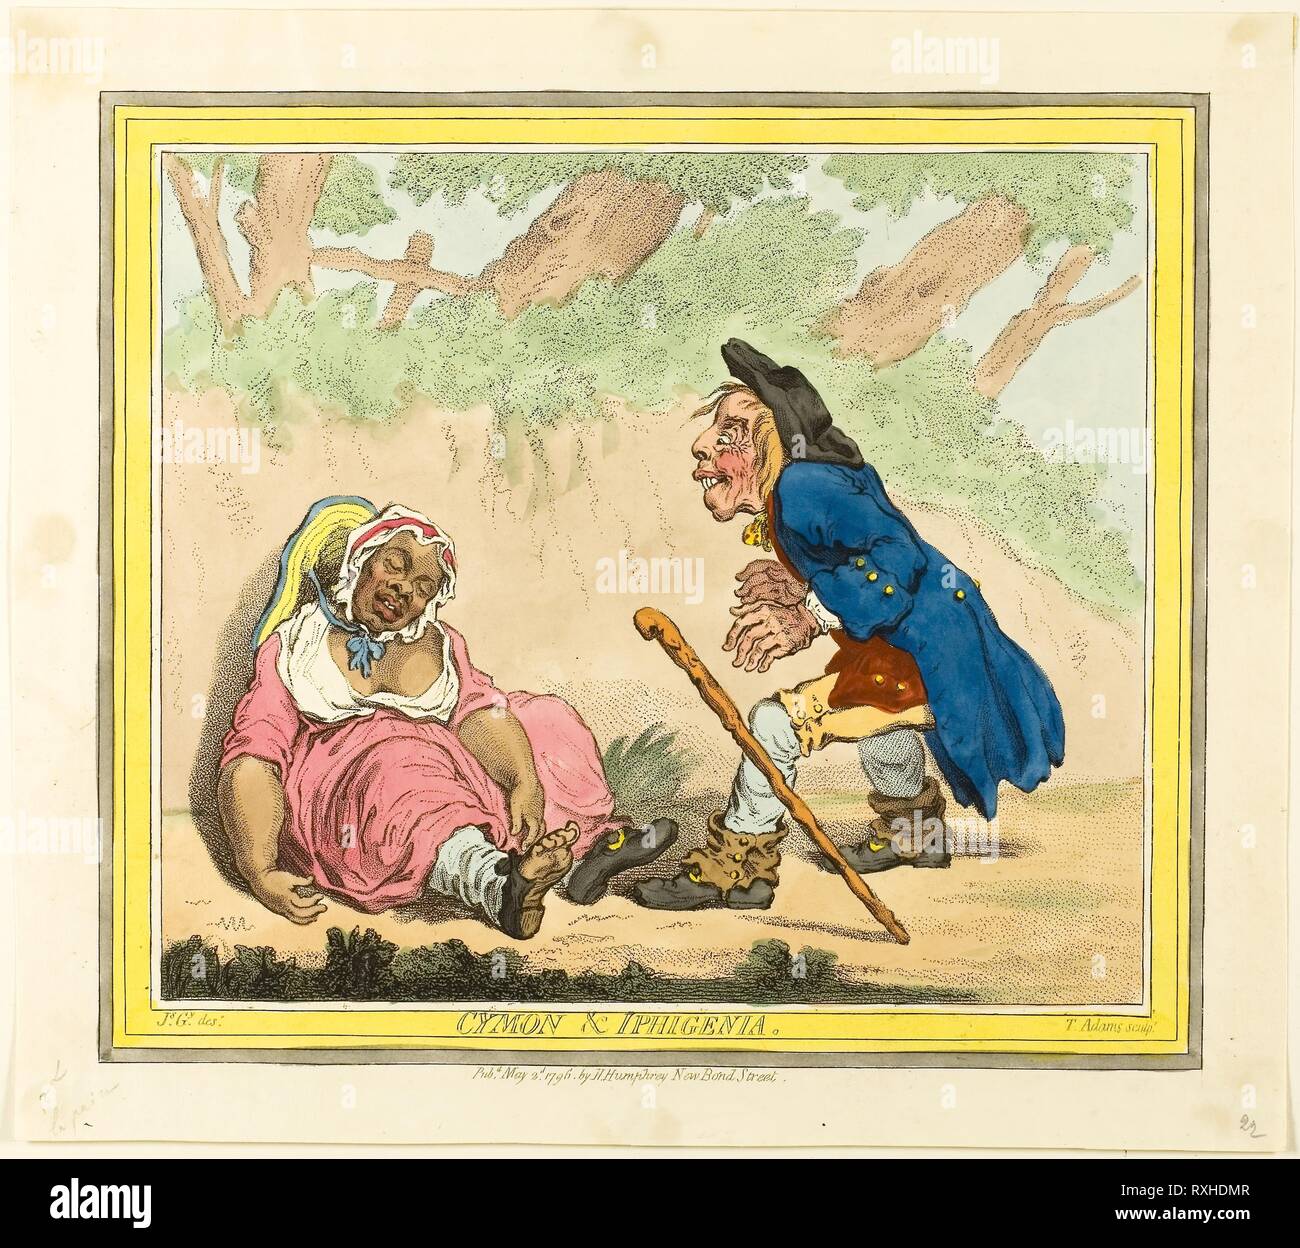 Cymon and Iphigenia. James Gillray (English, 1756-1815); published by Hannah Humphrey (English, c. 1745-1818). Date: 1796. Dimensions: 241 × 275 mm (image); 253 × 318 mm (plate); 281 × 318 mm (sheet). Etching in dark brown, with handcoloring and stipling, on cream wove paper. Origin: England. Museum: The Chicago Art Institute. Stock Photo